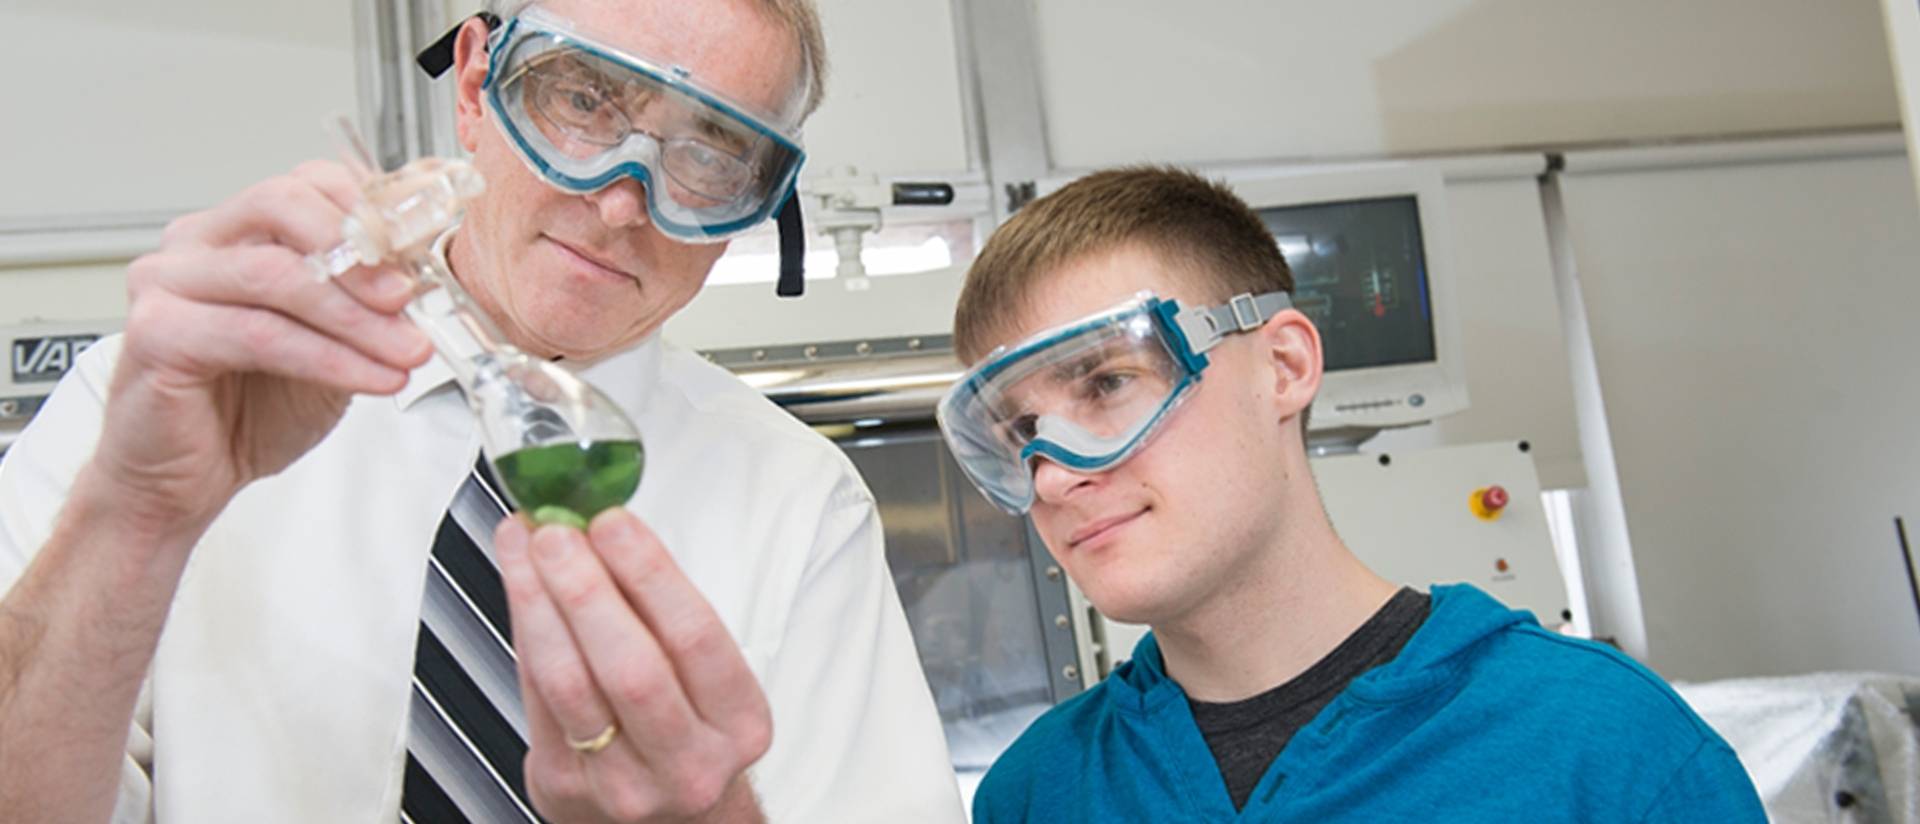 A professor and student wear safety goggles as they observe a green liquid held in a glass.